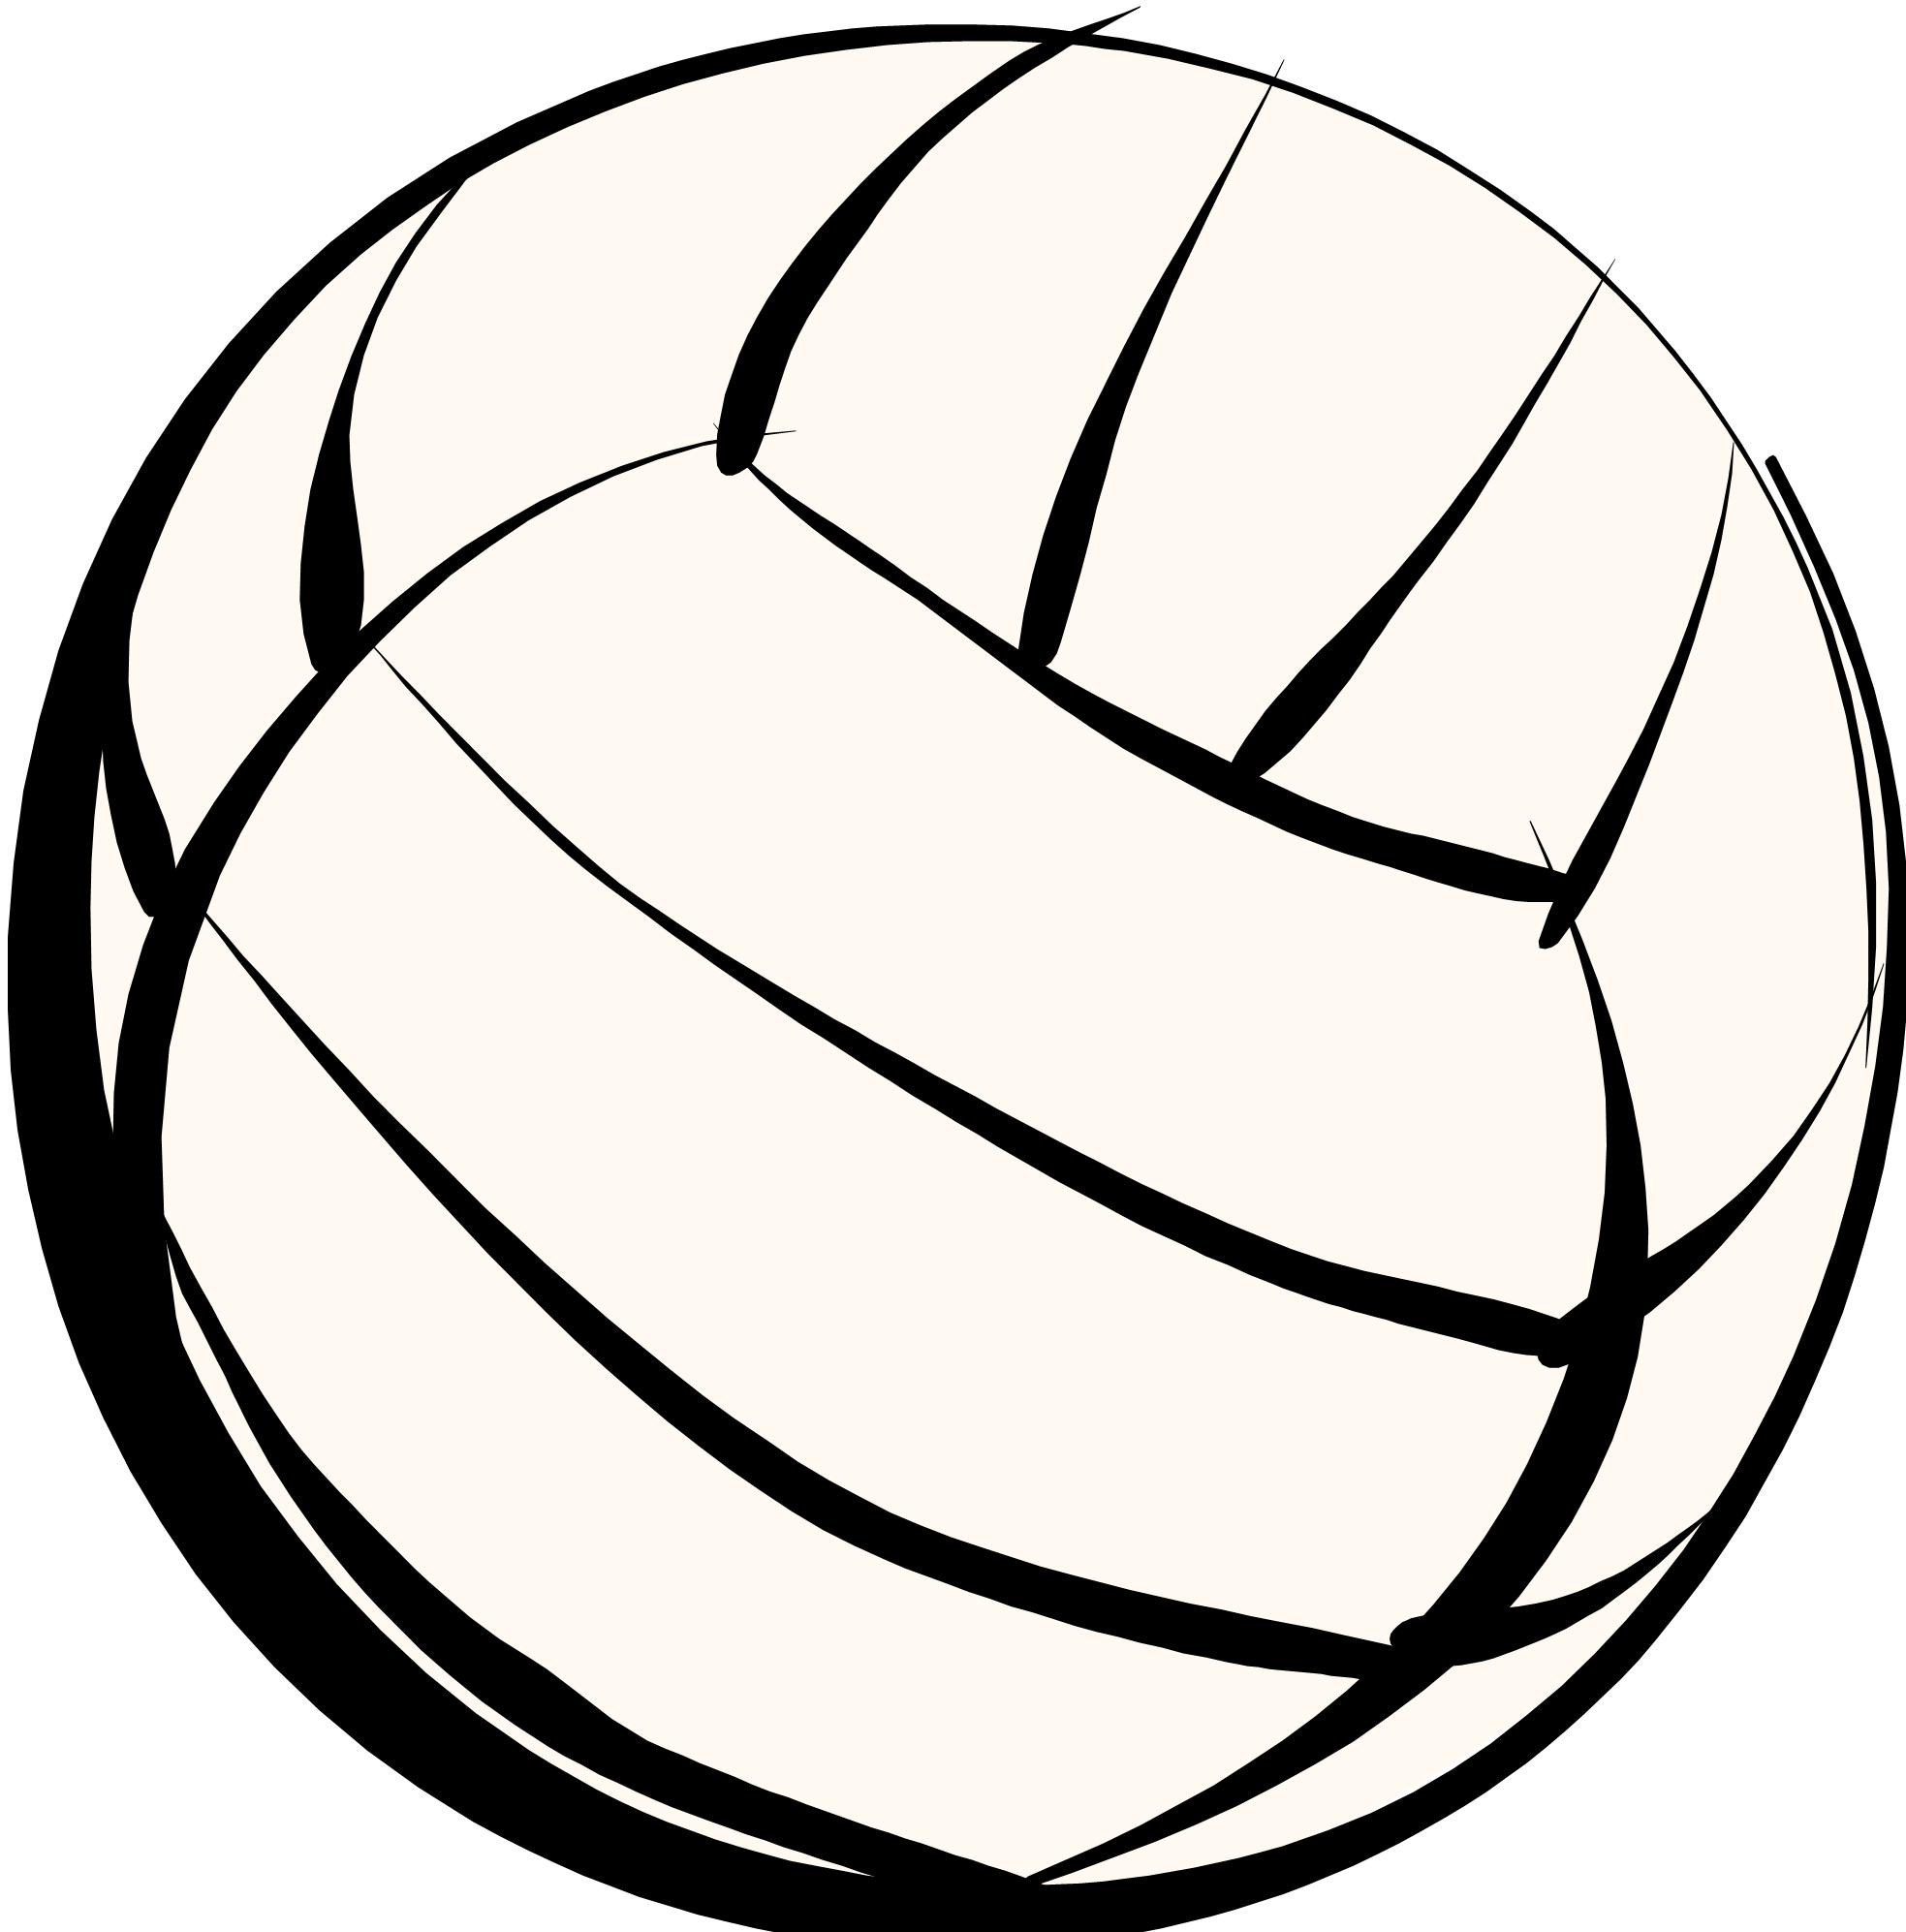 Volleyball net clipart blank background